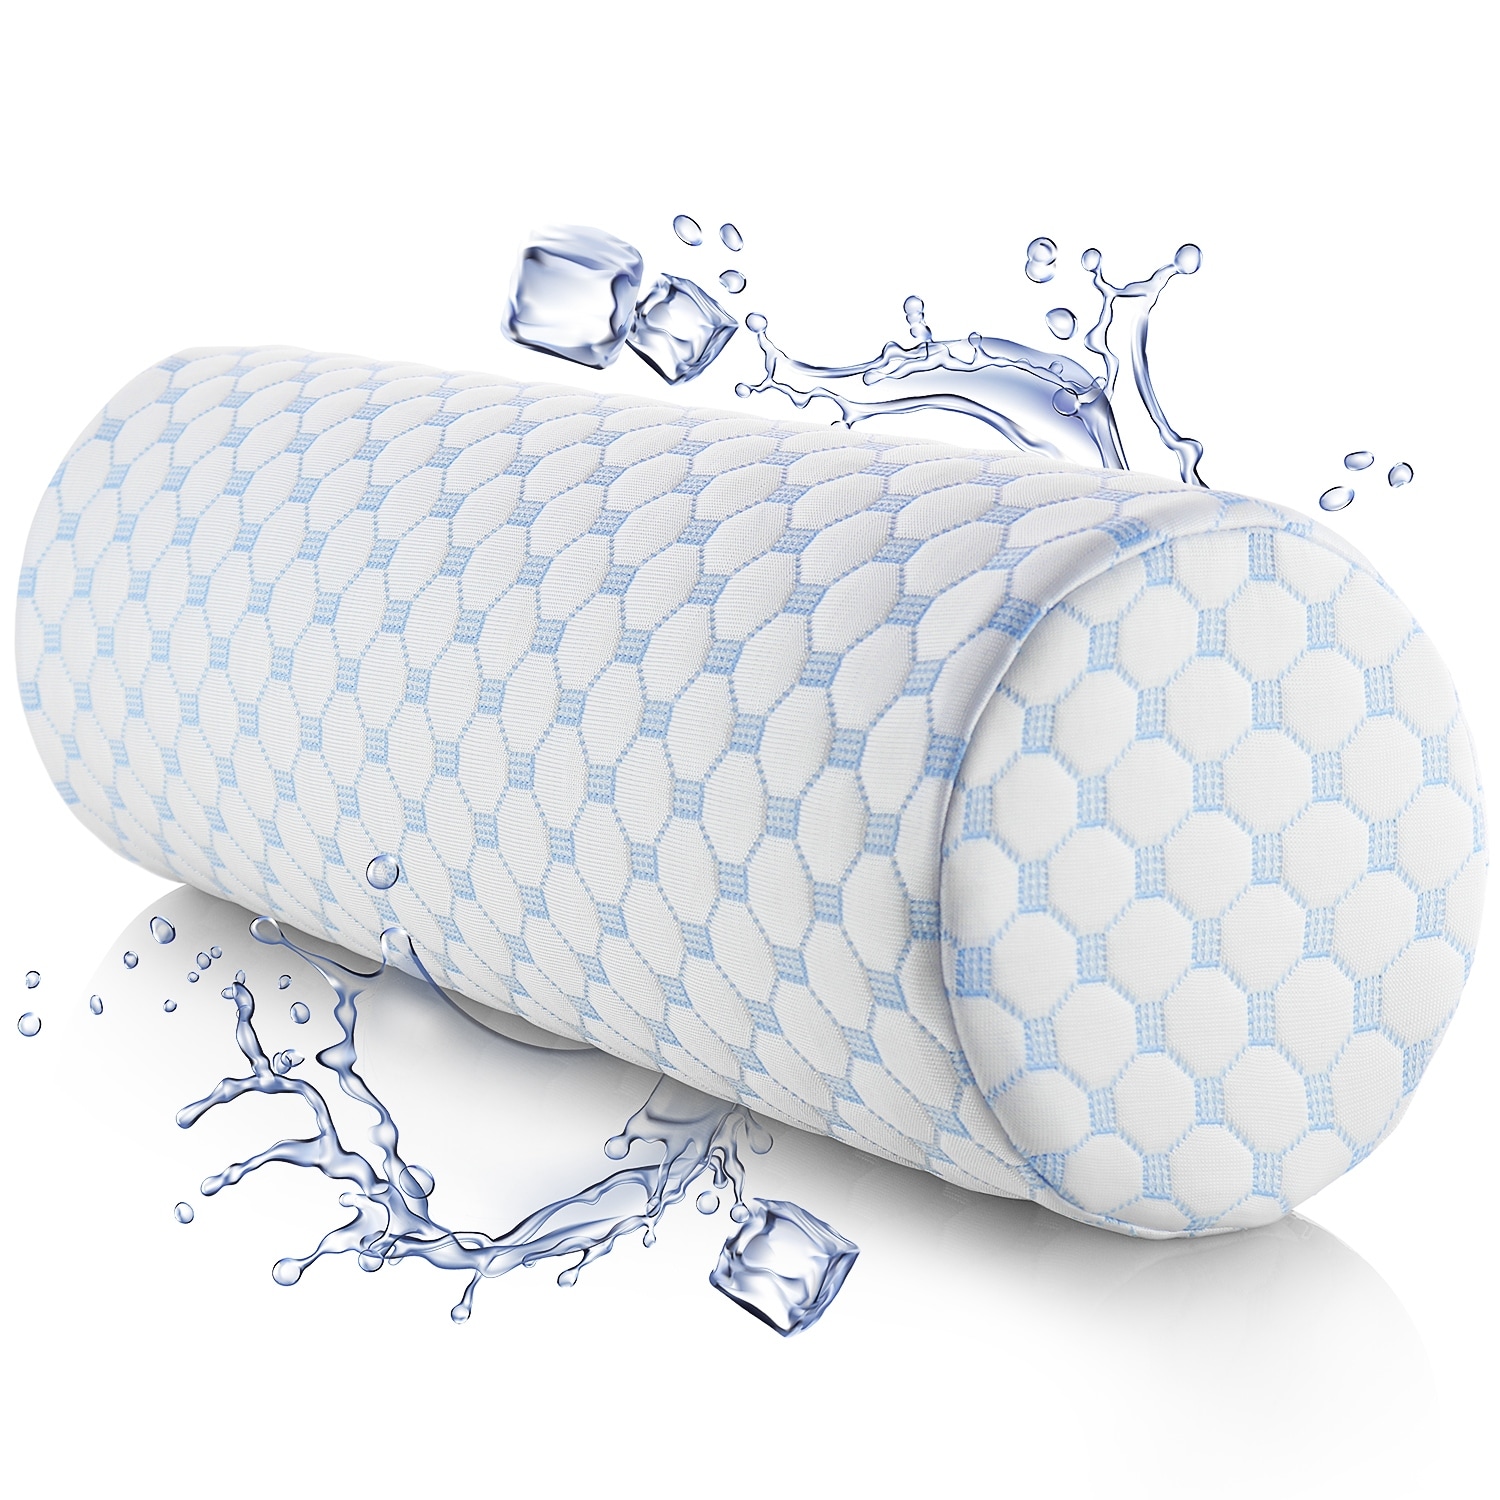 https://ak1.ostkcdn.com/images/products/is/images/direct/ad003d521ac079f611185189b58d34aab8c1ea95/Nestl-Memory-Foam-Cooling-Neck-Pillow-for-Pain-Relief-Sleeping---Cylinder-Neck-Roll-Pillow-with-a-Breathable-Cooling-Cover.jpg